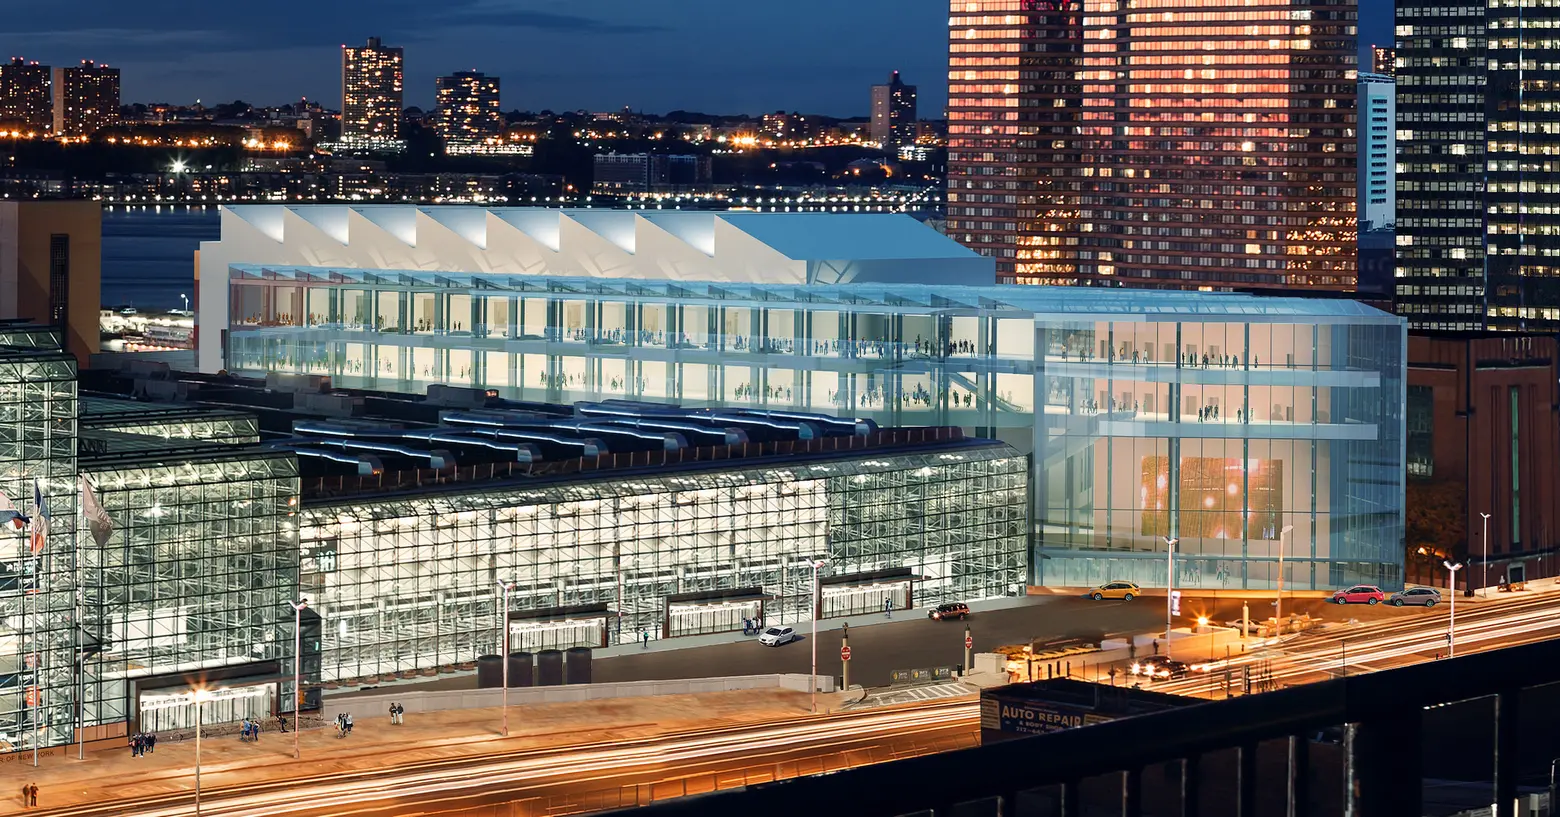 $1B expansion of the Javits Center will commence this year